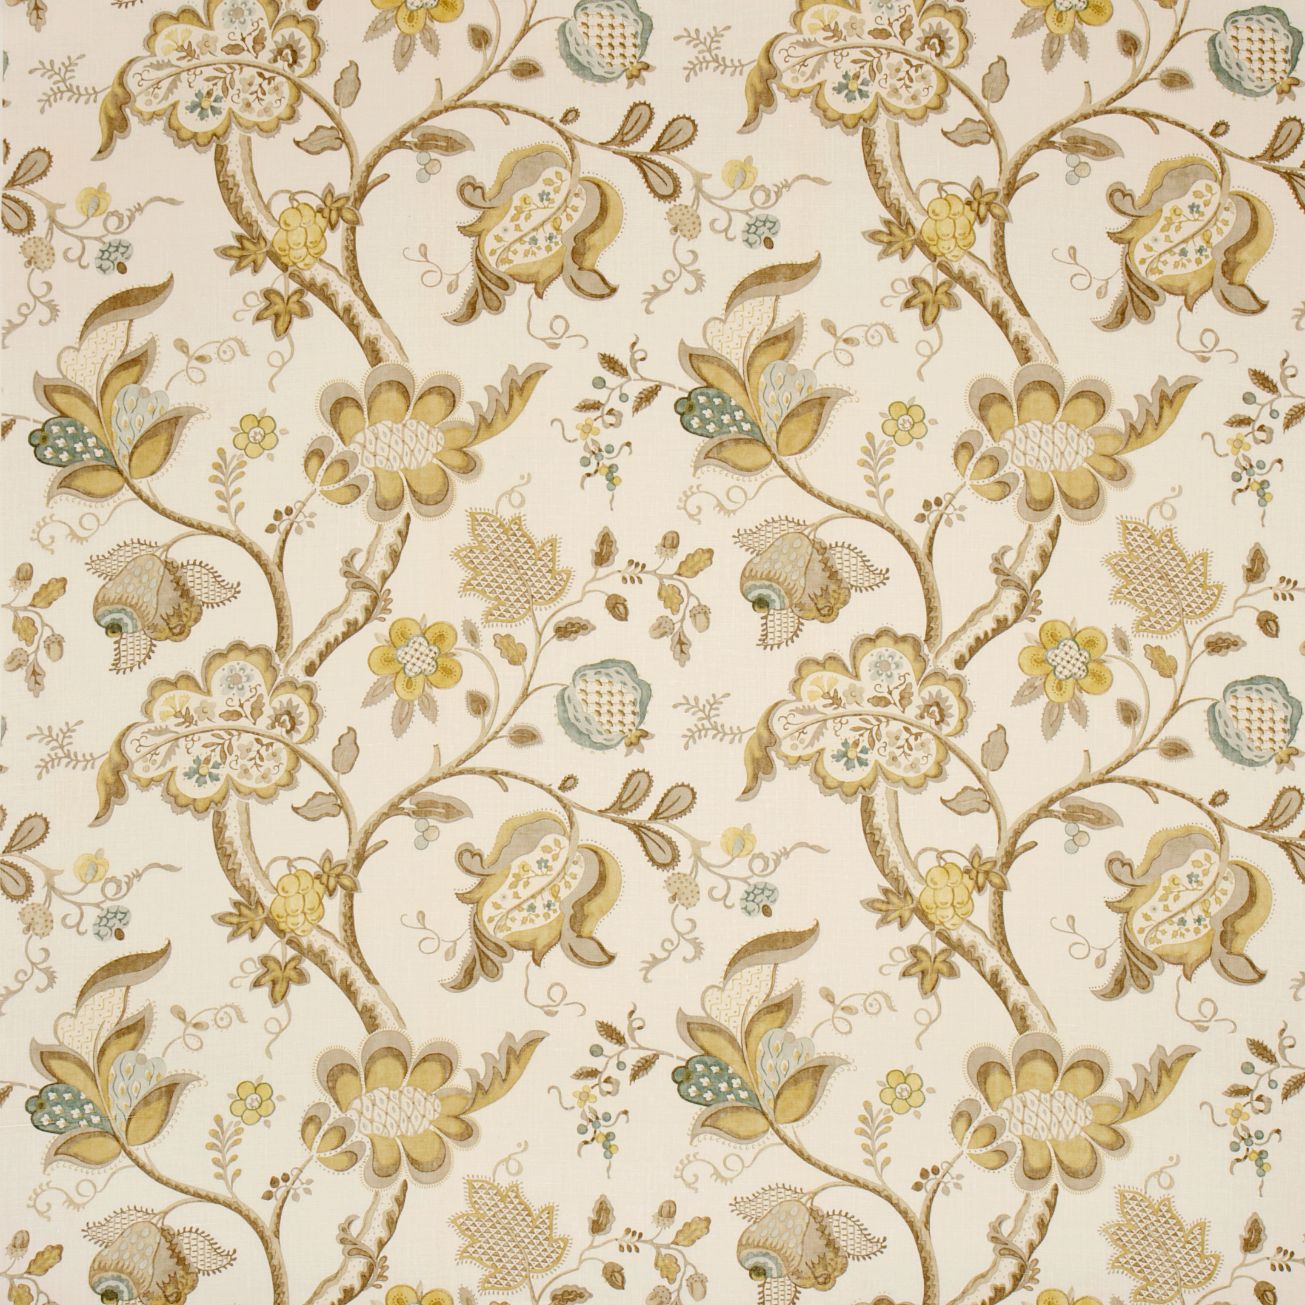 Wallpaper Design In It Was Later Manufactured As A Printed